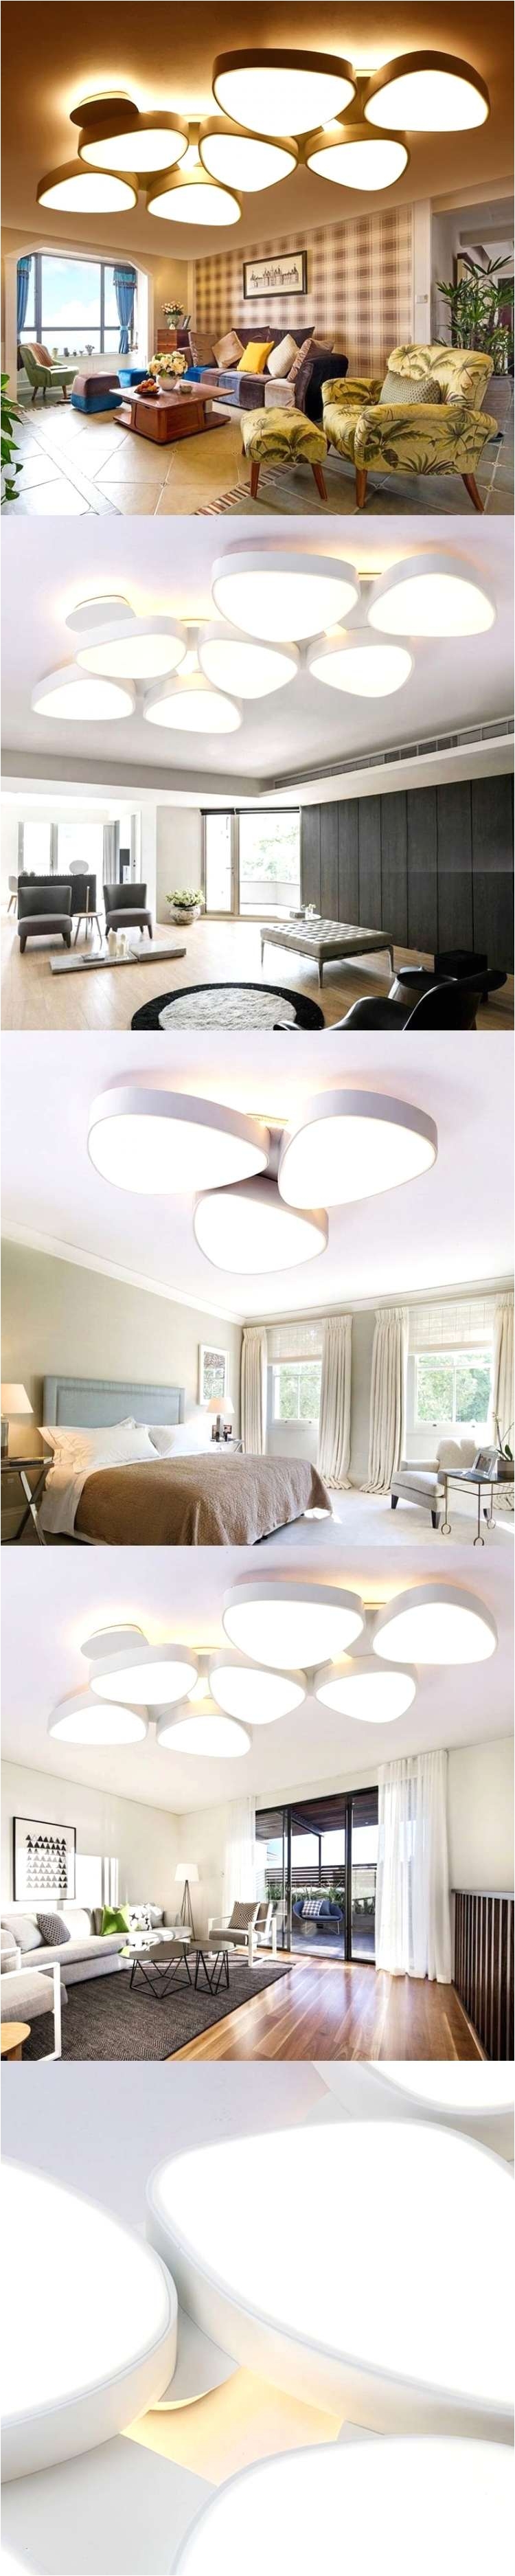 Convert Recessed Light to Flush Mount Best Of Led Pendant Light Fixturesled Pendant Light Fixtures New 32